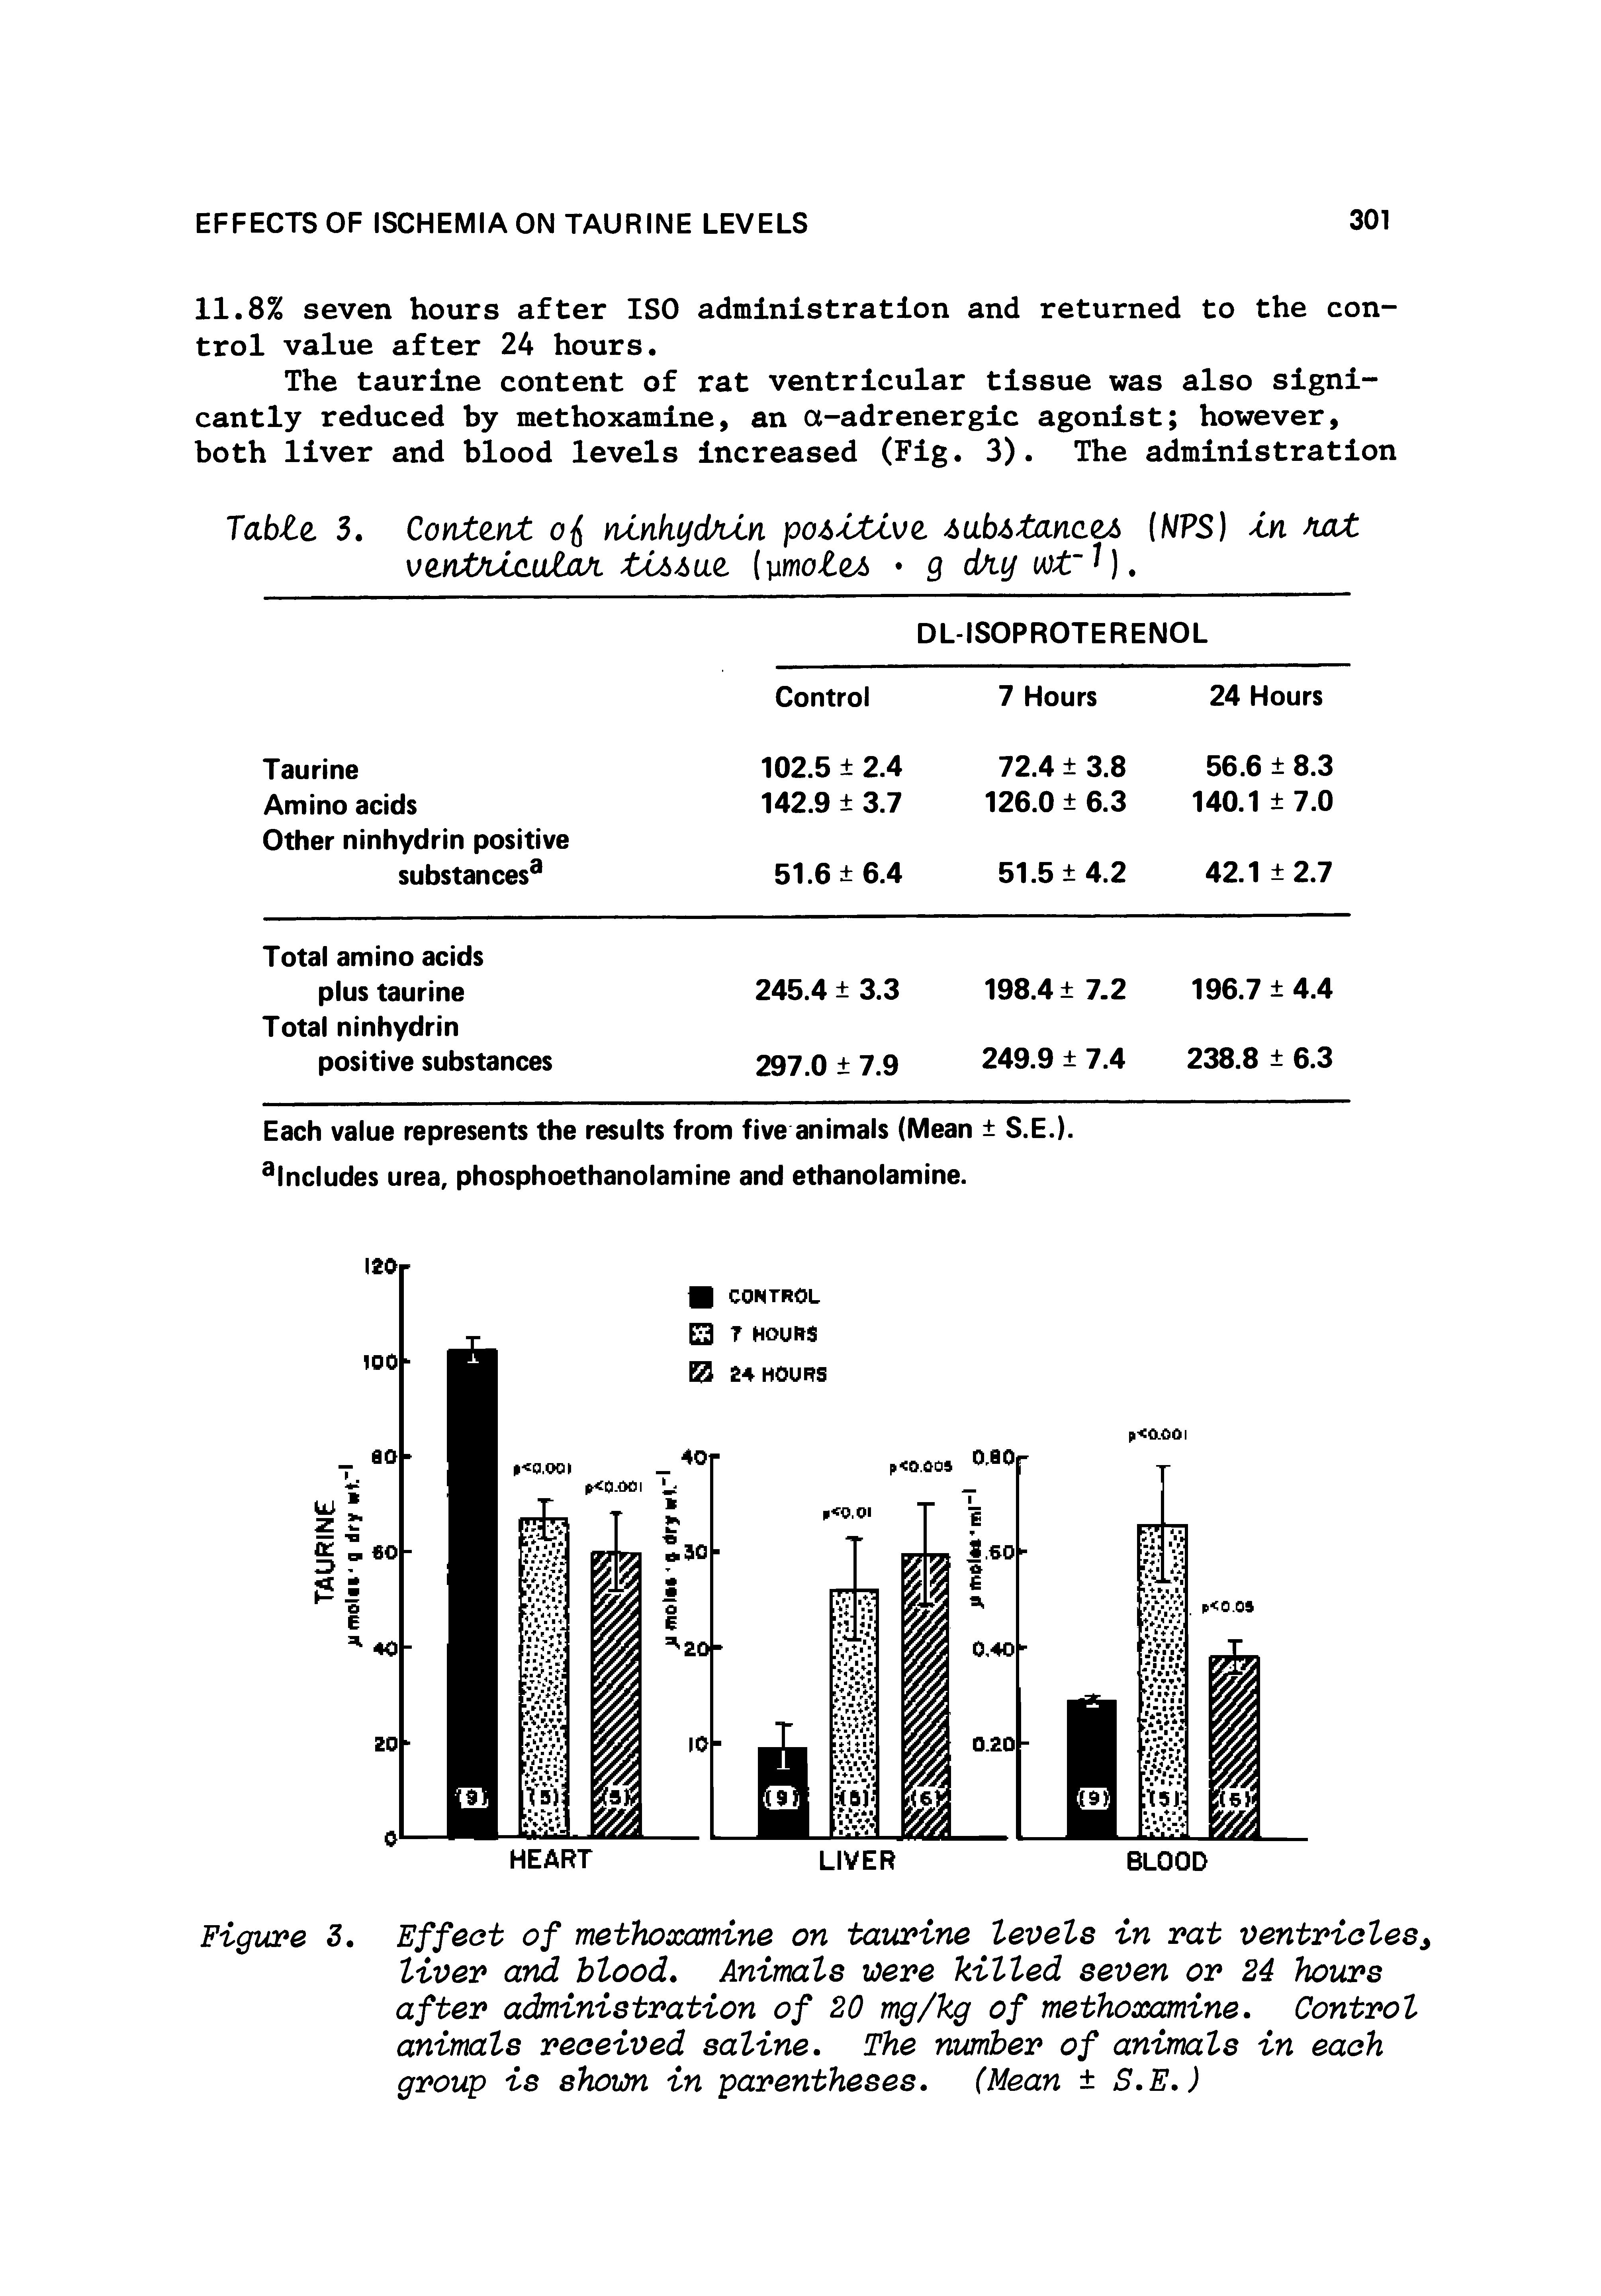 Figure 3. Effect of methoaximine on taurine levels in rat ventriclesy liver and hlood. Animals were killed seven or 24 hours after administration of 20 mg/kg of methoxamine. Control animals received saline. The number of animals in each group is shown in parentheses. (Mean S.E.)...